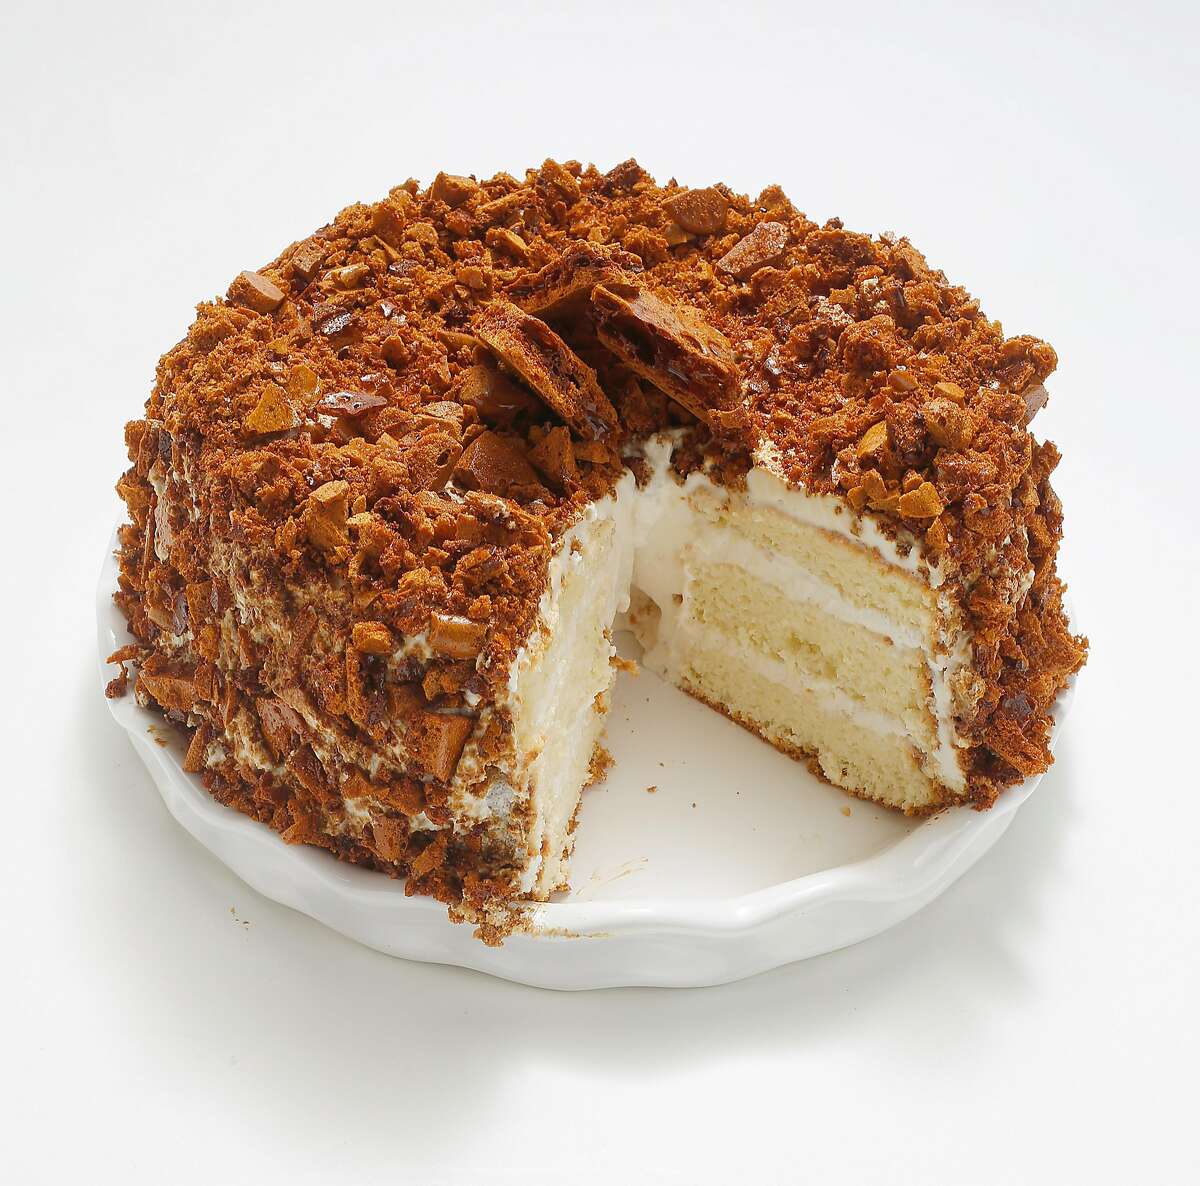 Blum's Coffee Crunch Cake on Tuesday, September 19, 2017, in San Francisco, Calif.